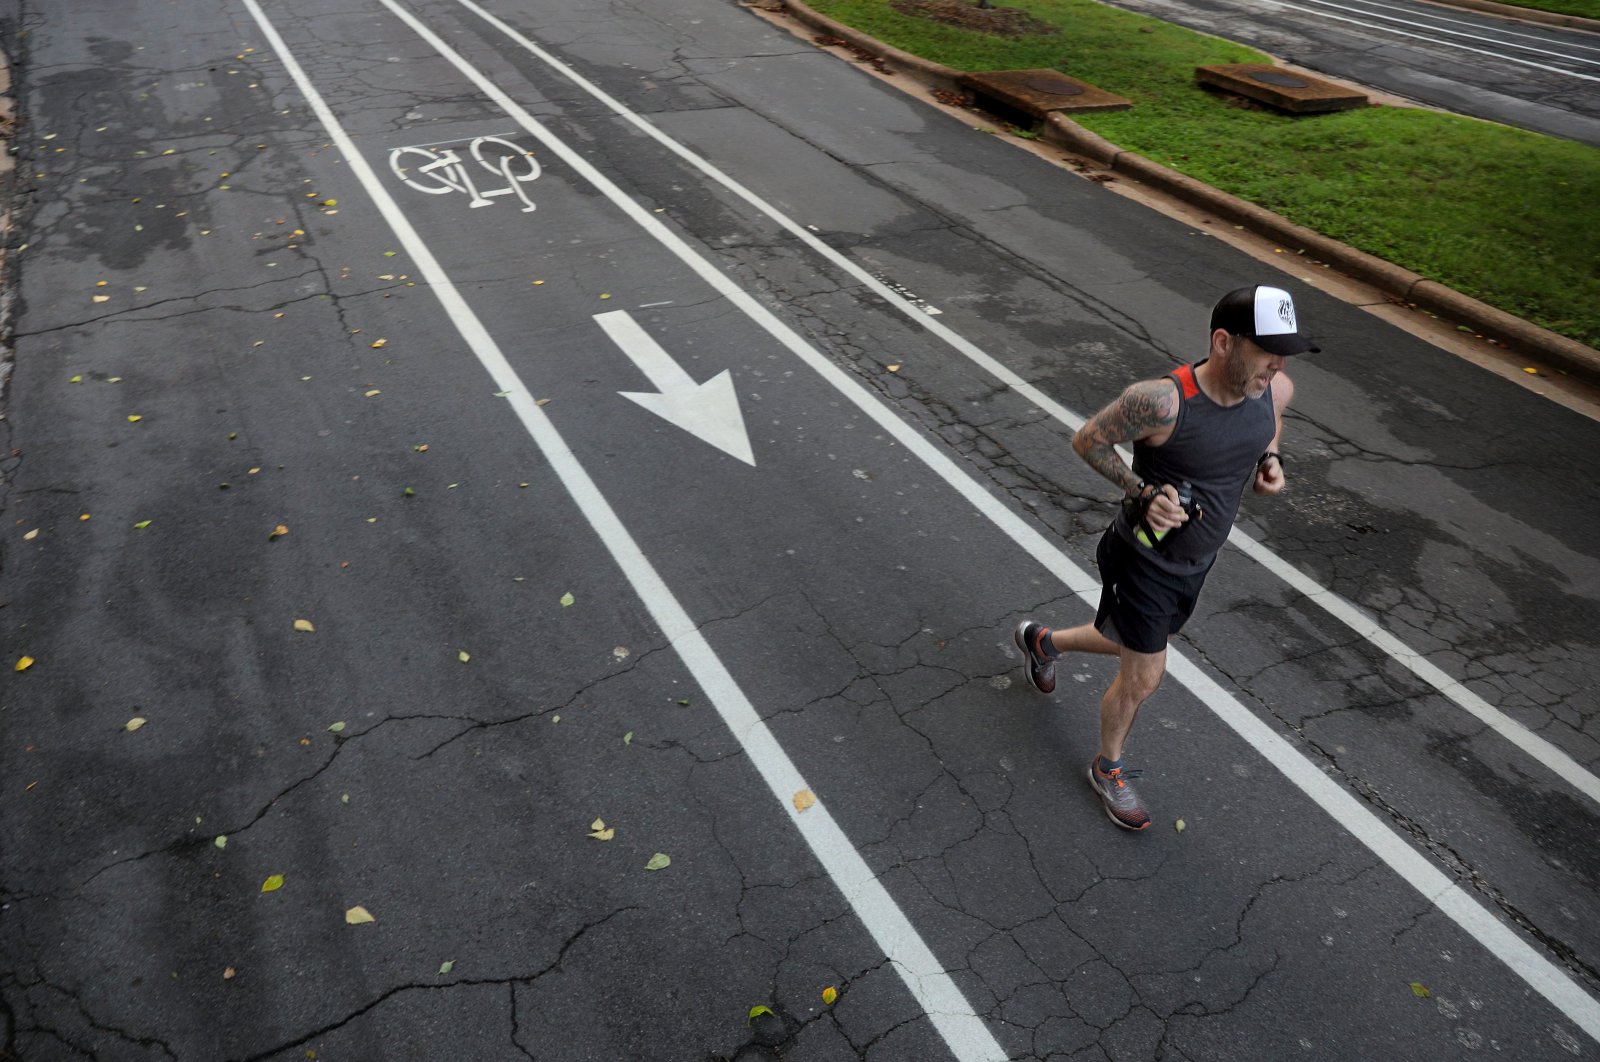 Former ultra-marathoner Josh Wiese runs along Pershing Avenue in University City, Missouri, U.S., Aug. 3, 2020. He can no longer complete a 2-mile run without stopping after contracting what was likely COVID-19 in March. (Christian Gooden/St. Louis Post-Dispatch/TNS/ABACAPRESS.COM via REUTERS)